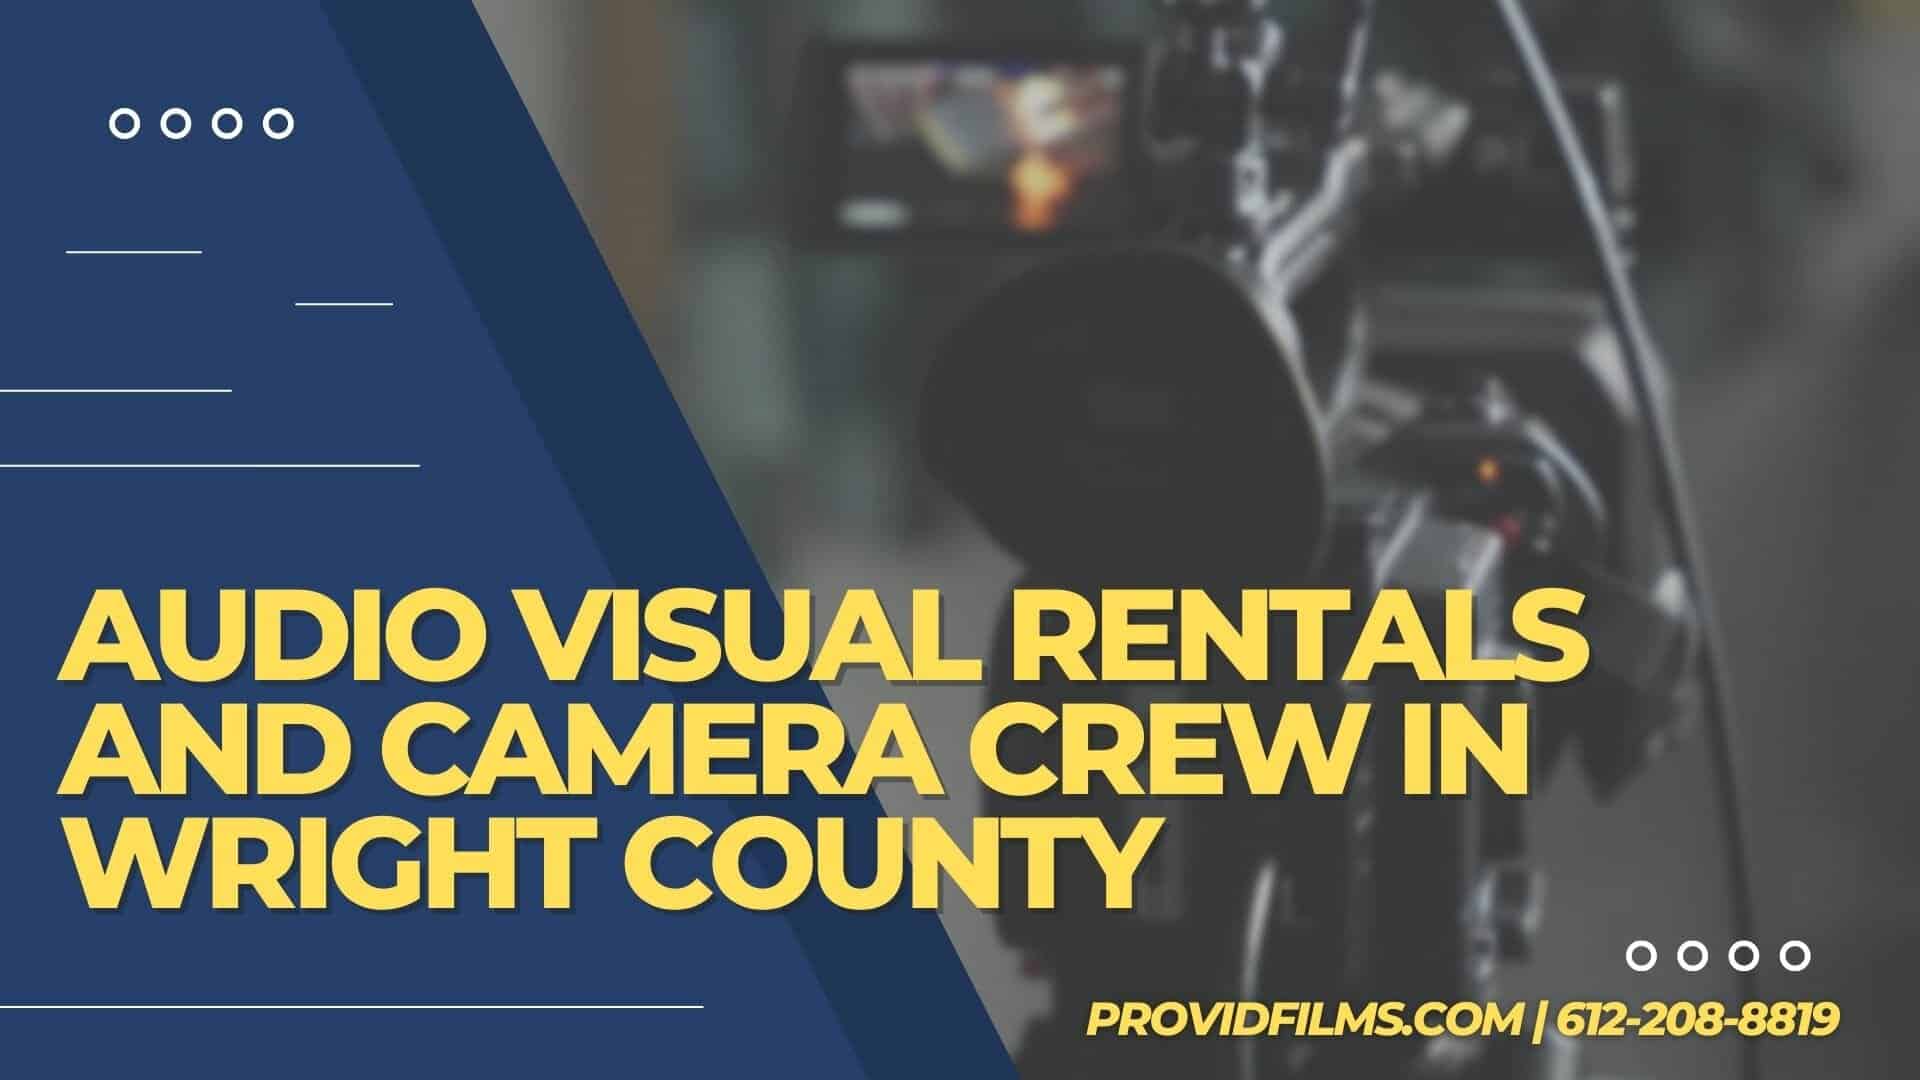 Graphic with a video camera crew with the text saying "AV Rental and Camera Crew in Wright County"